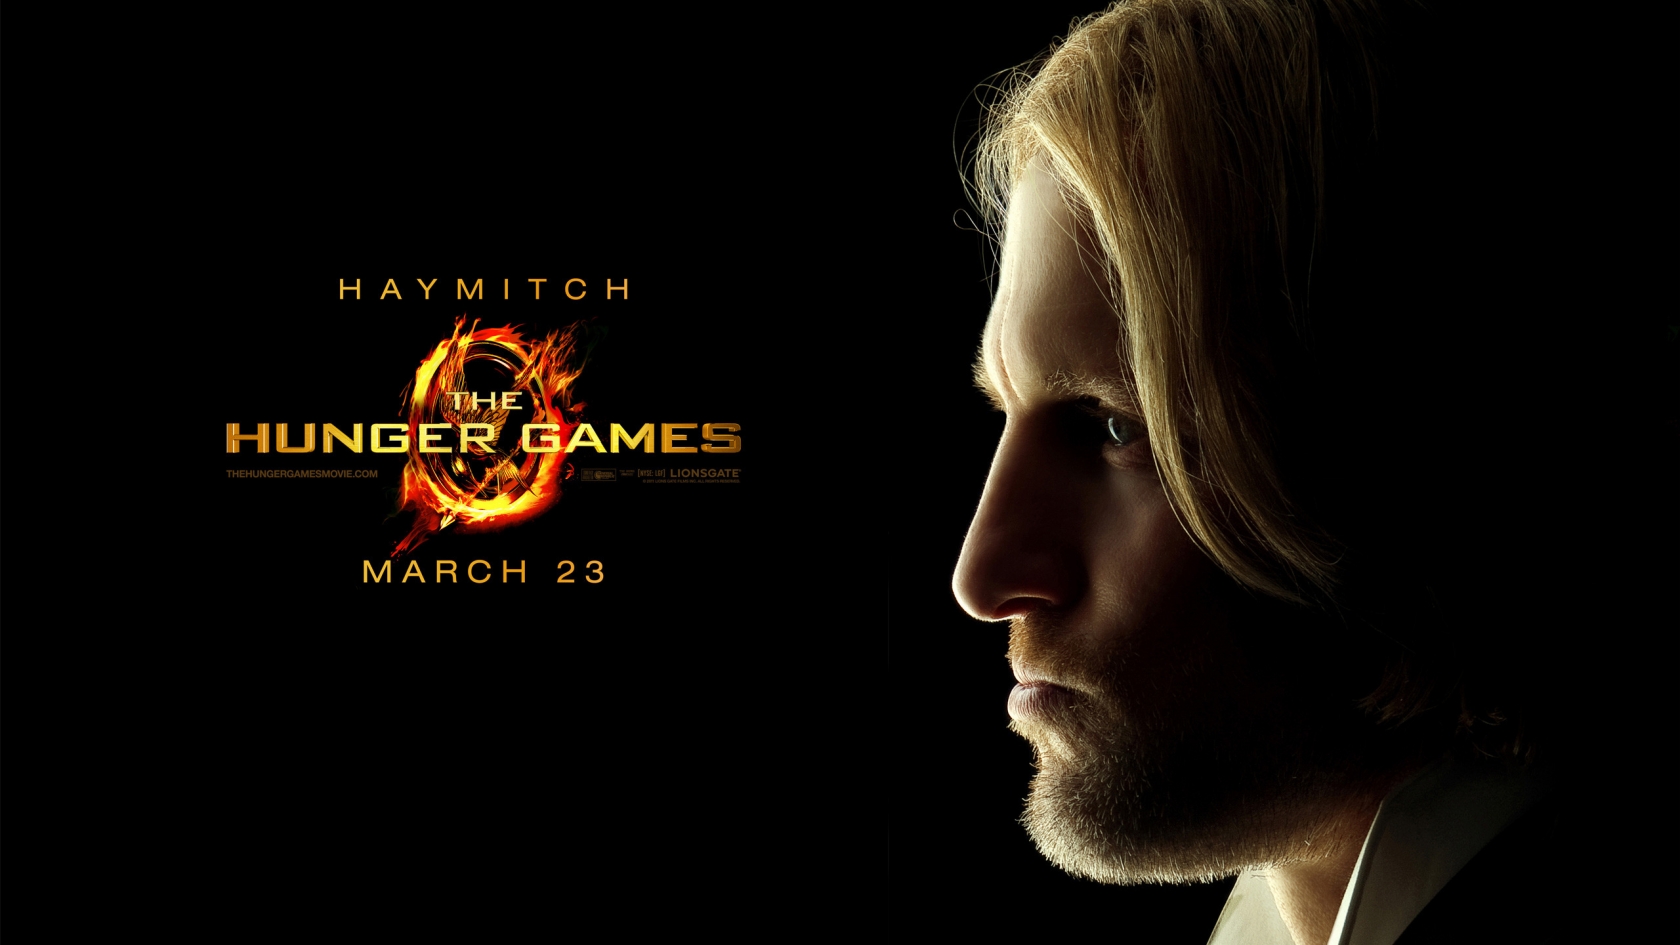 The Hunger Games Haymitch for 1680 x 945 HDTV resolution